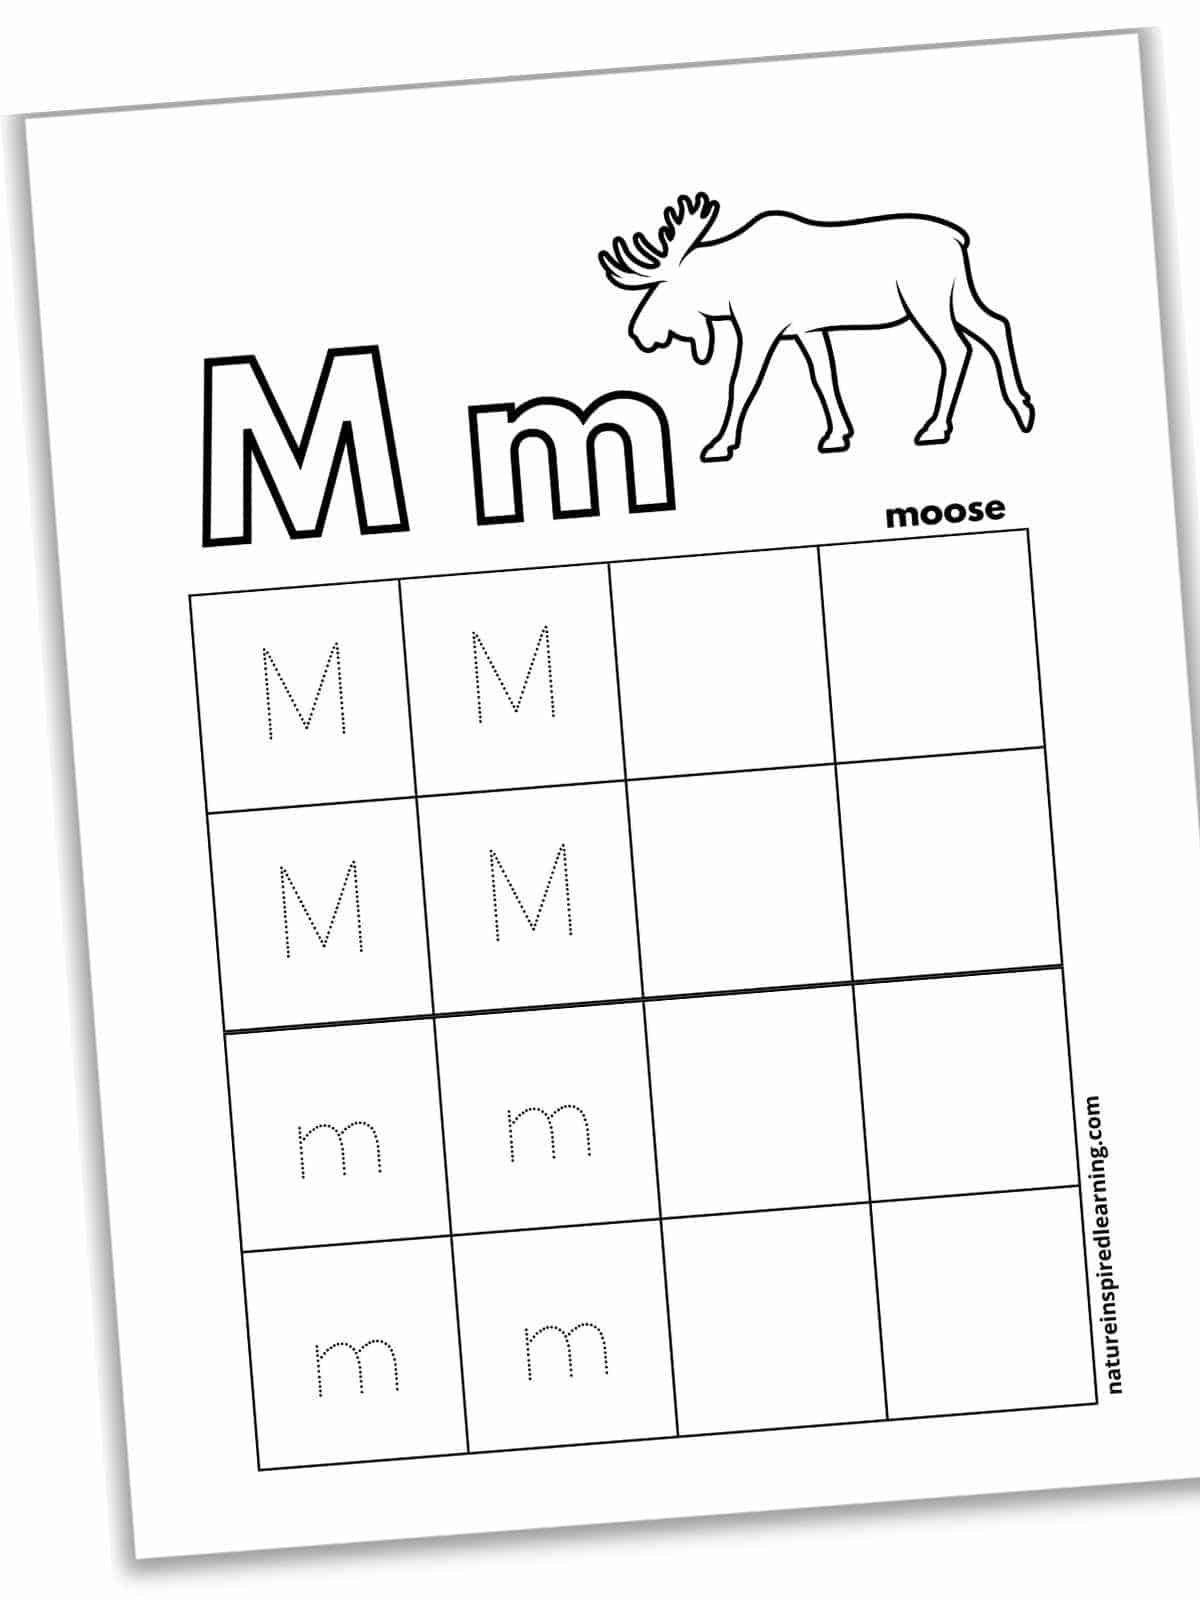 Black and white worksheet with capital and lowercase M's in outline form across the top with an outline of a moose. Grid below with traceable letters: four capital M's, four lowercase m's, and eight blank boxes.